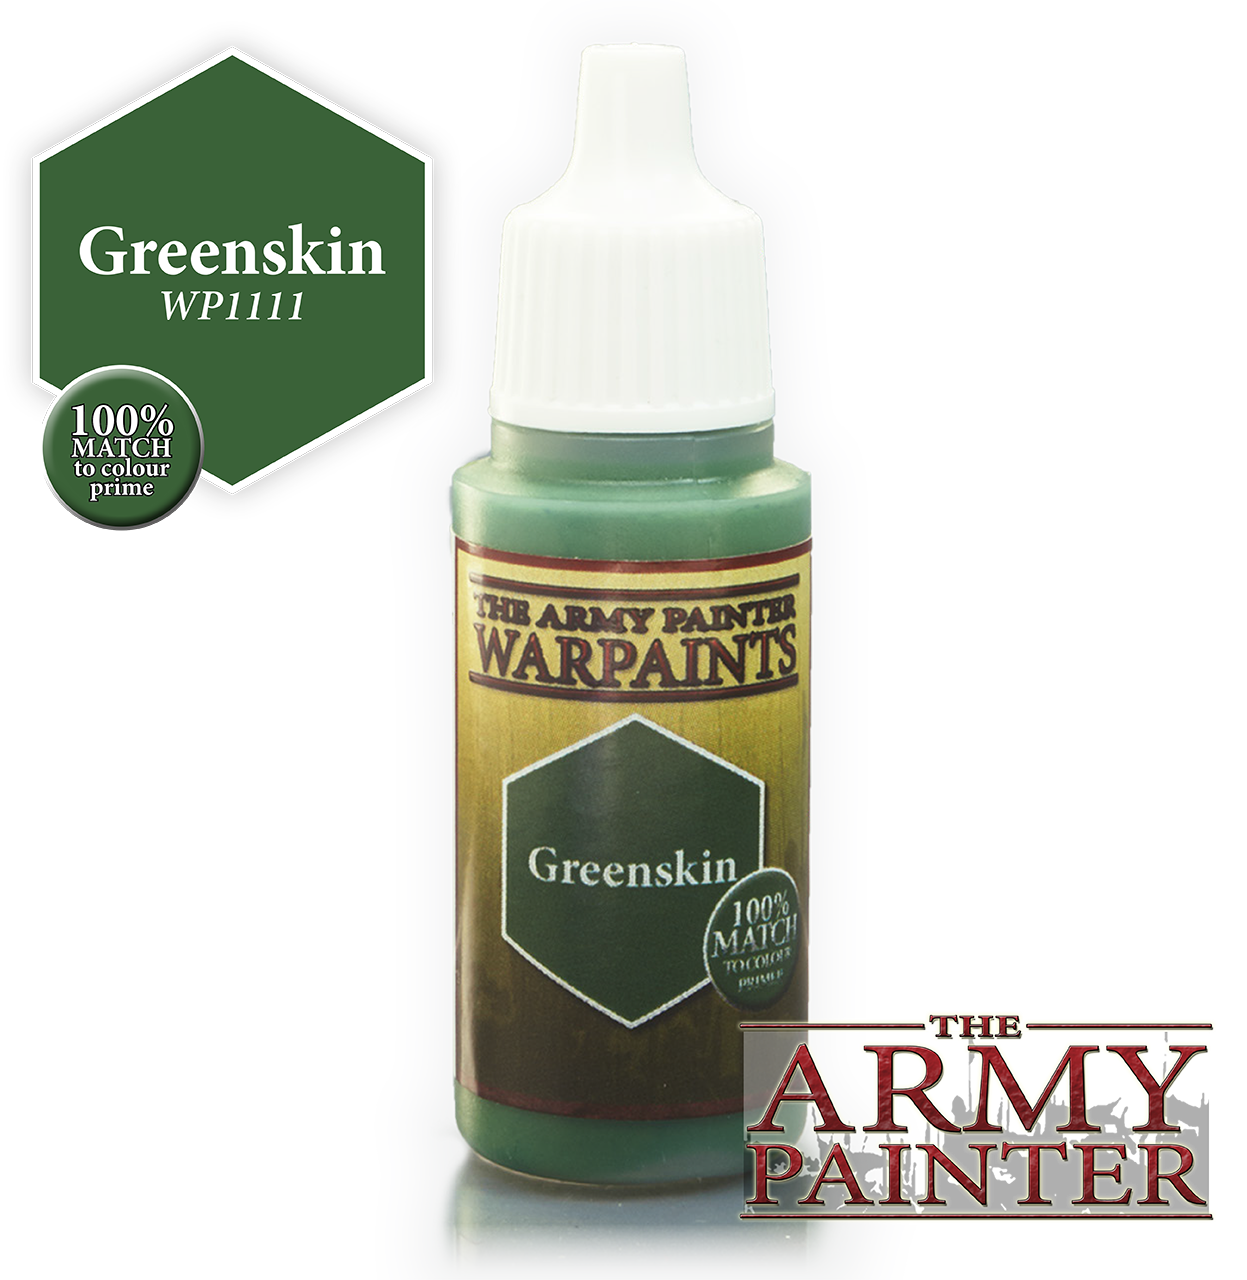 The ARMY PAINTER: Acrylics Warpaint - Greenskin | Tacoma Games